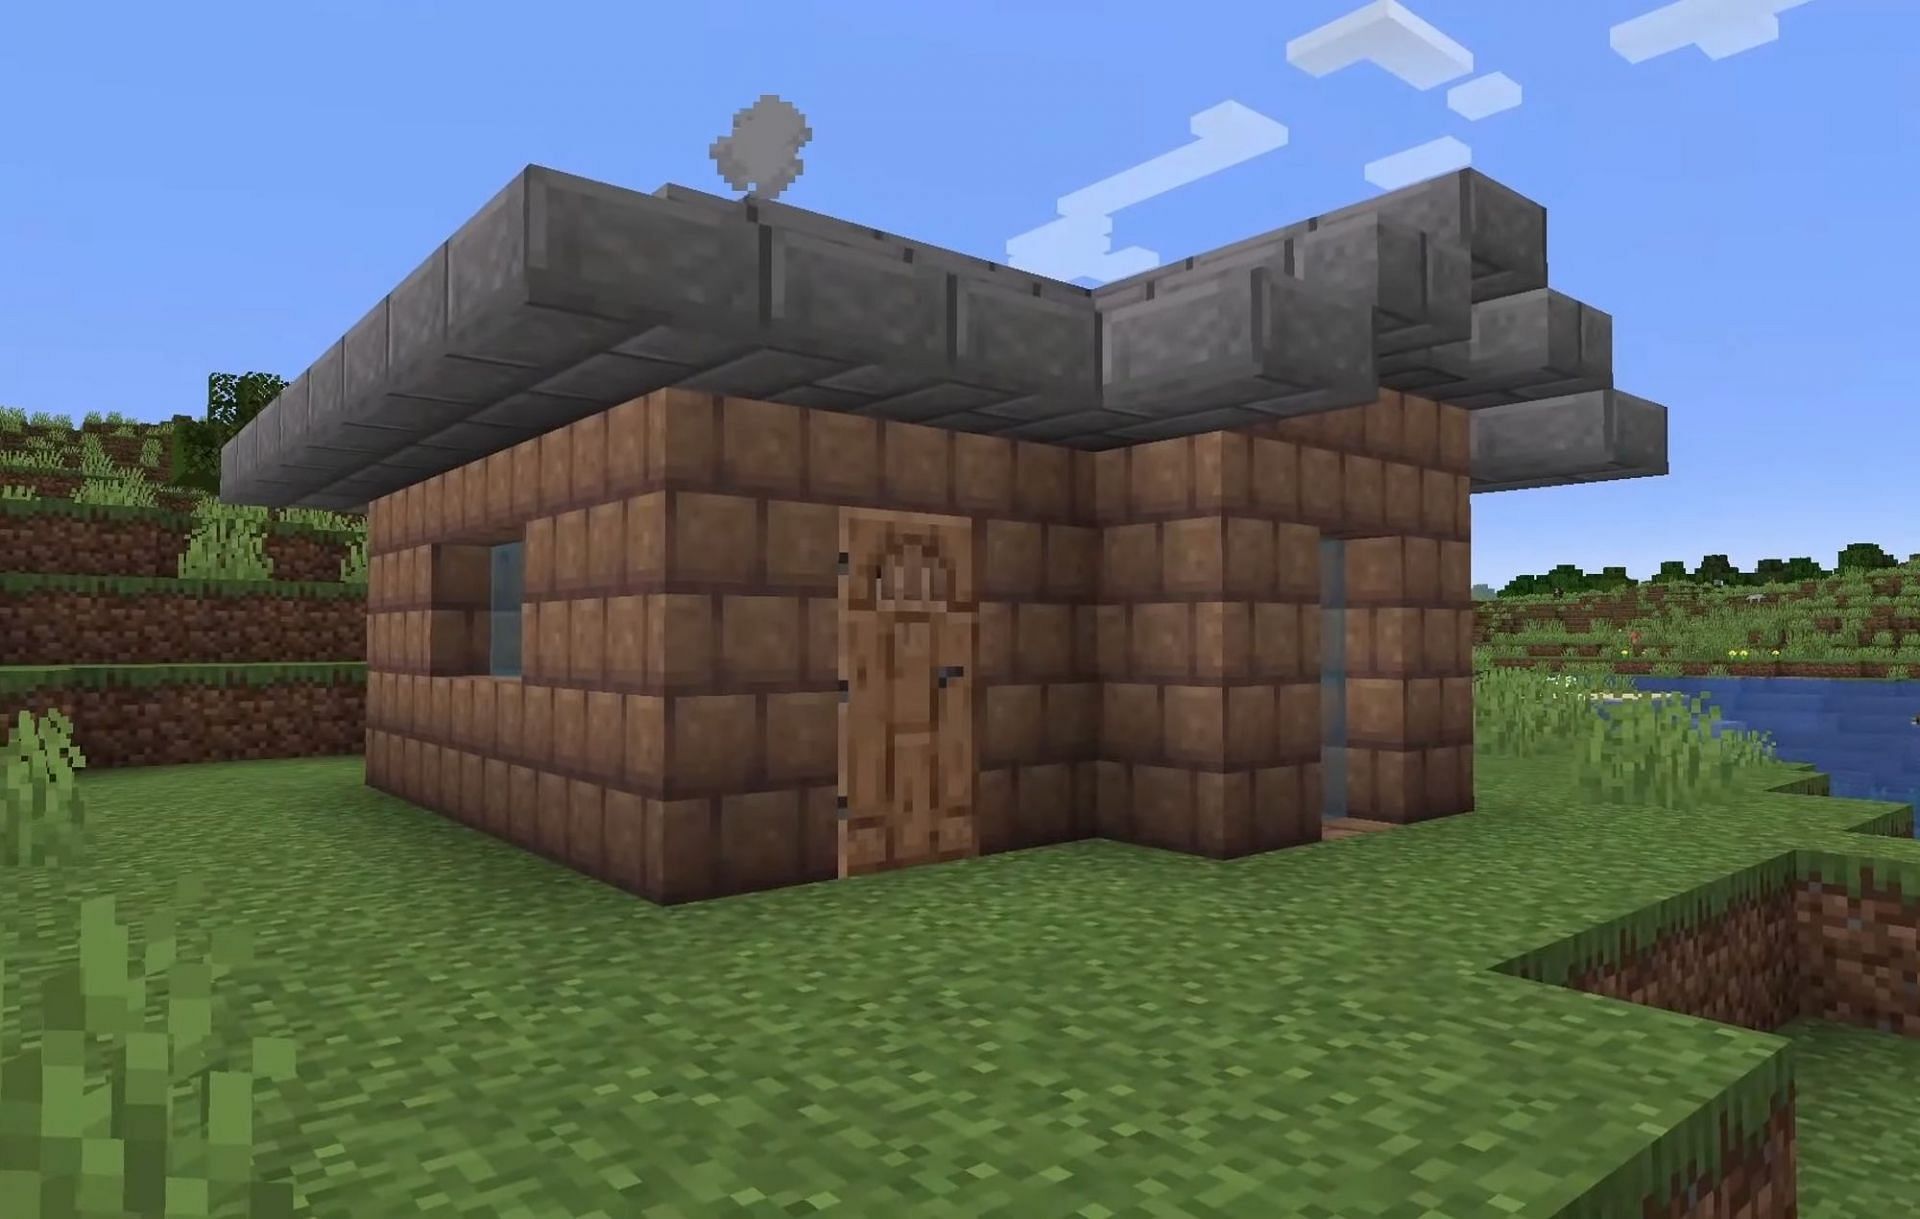 A mud-brick home, one of the many future features to come in The Wild Update (Image via Mojang)